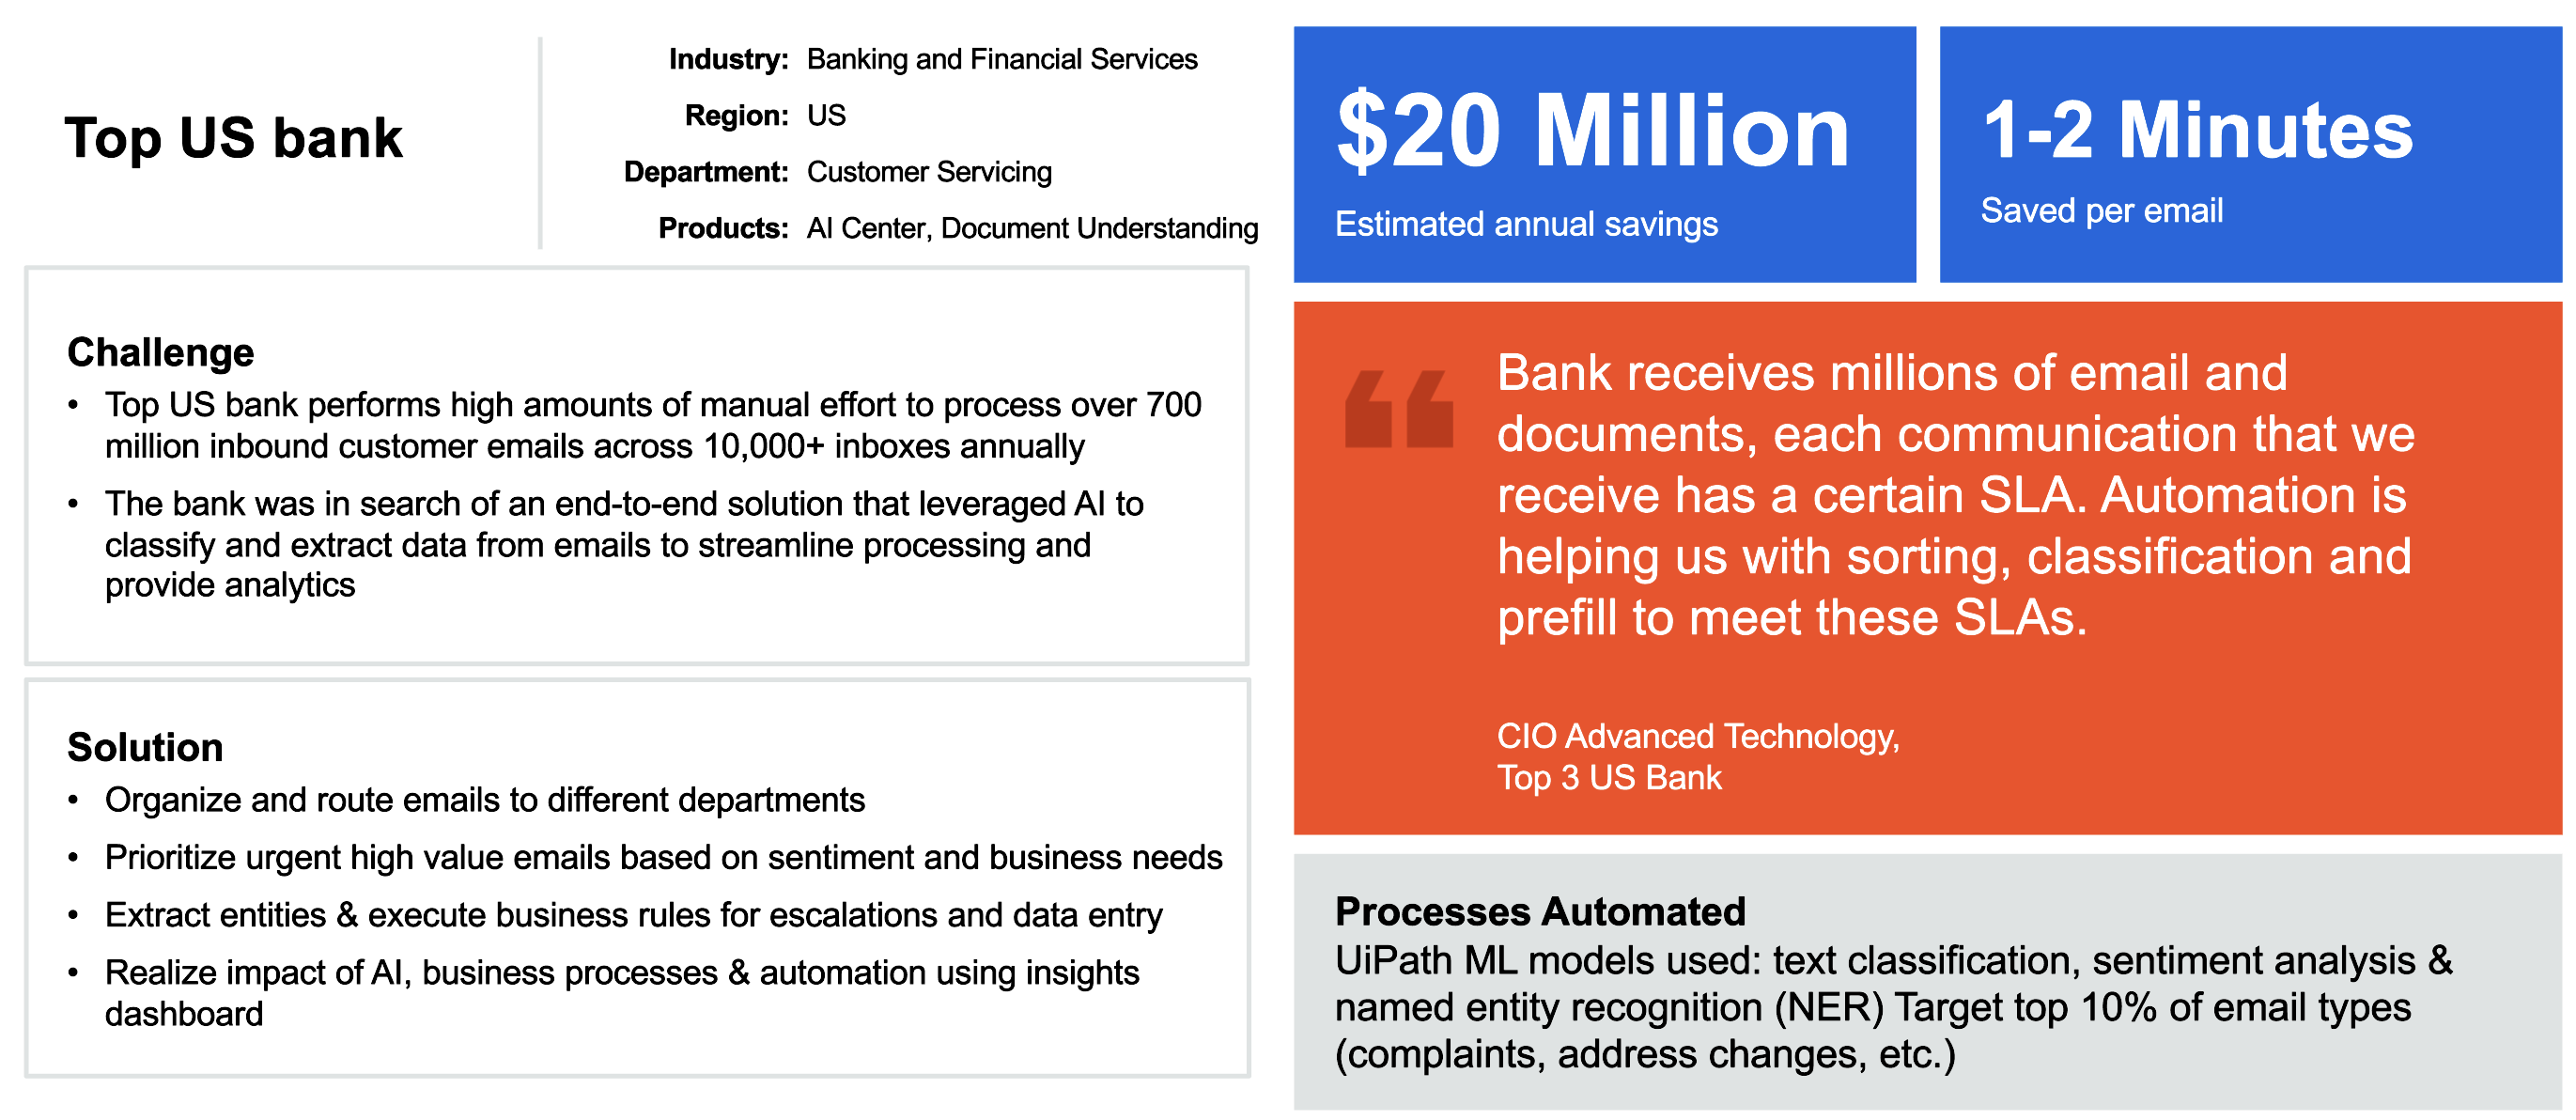 Top U.S. bank smart email automation